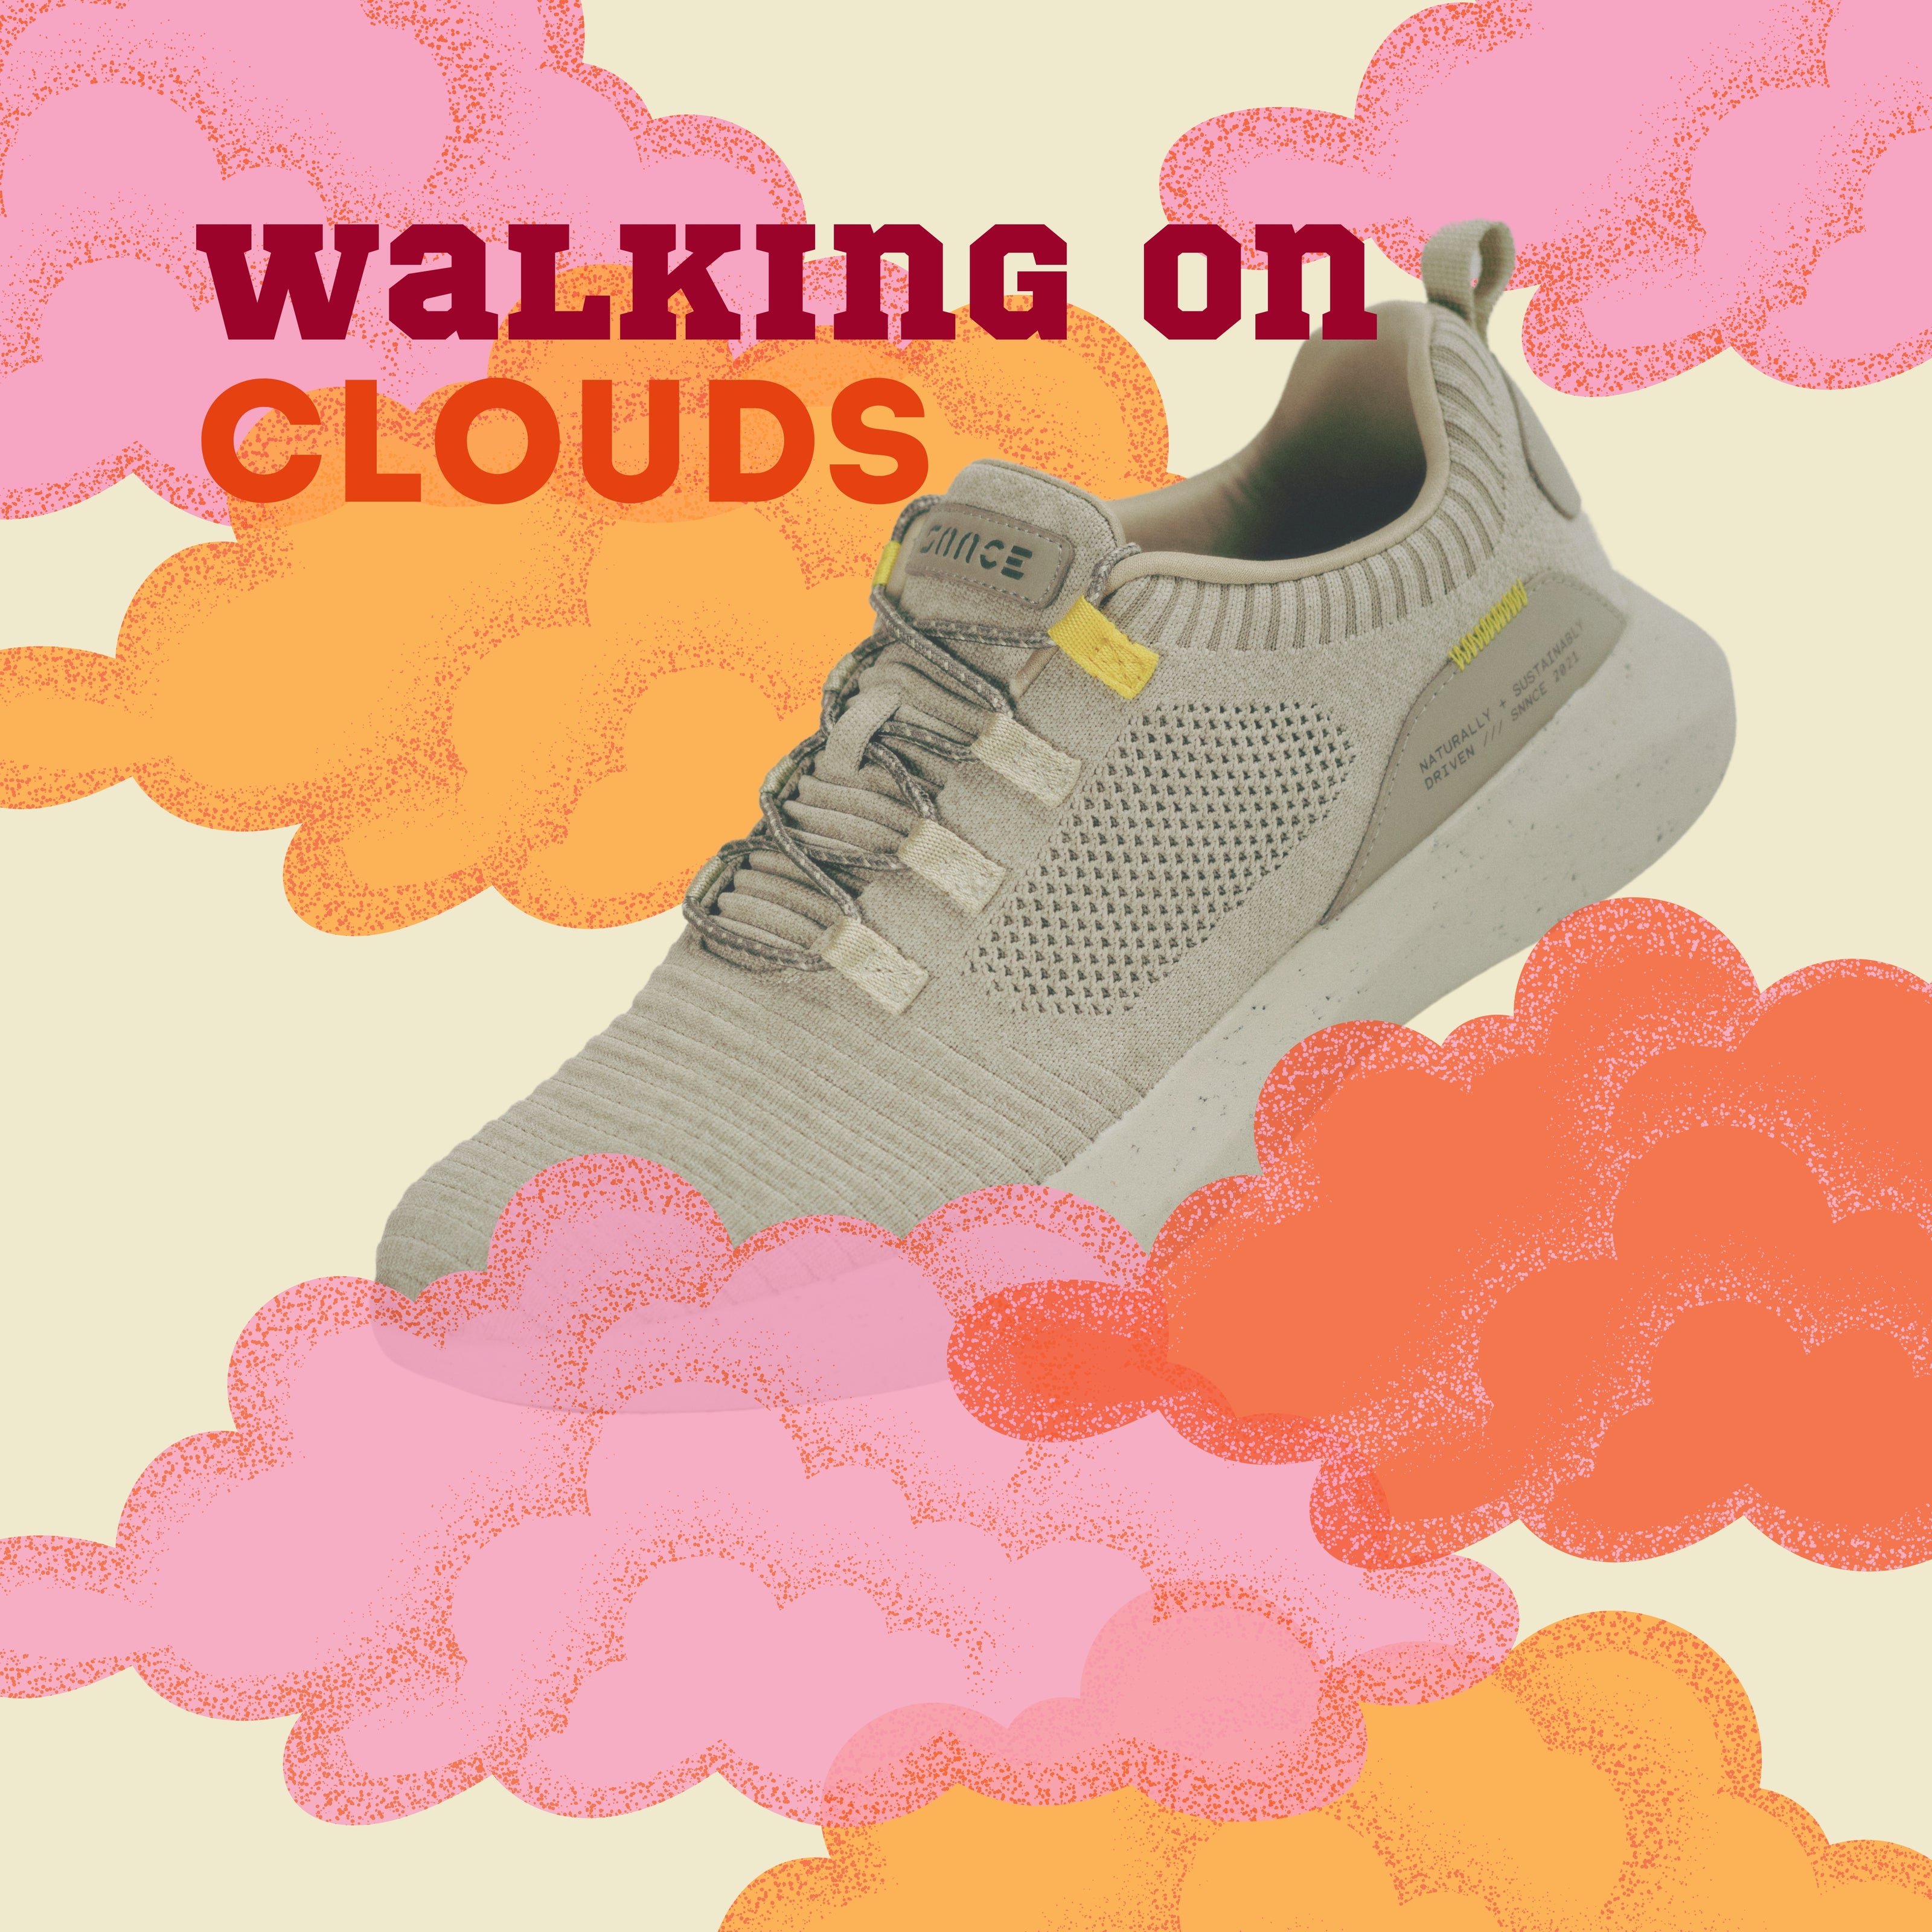 SNNCE Tabi Sneakers floating on colorful cartoon clouds